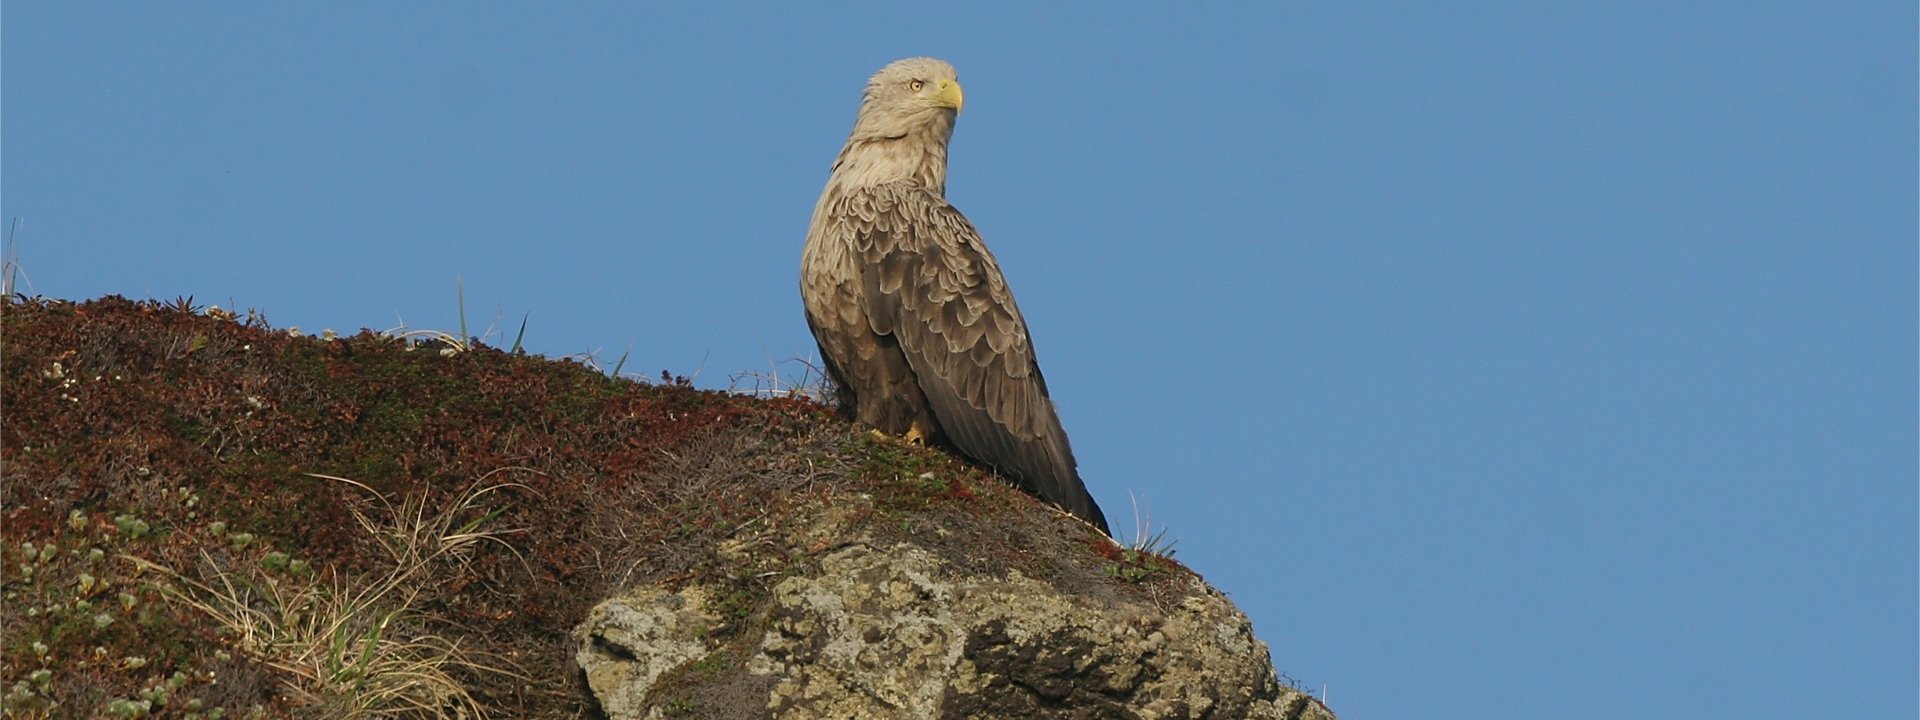 https://limosa-holidays-co-uk.s3.amazonaws.com/images/White-tailed_Eagle_CPC.2e16d0ba.fill-1920x720.jpg